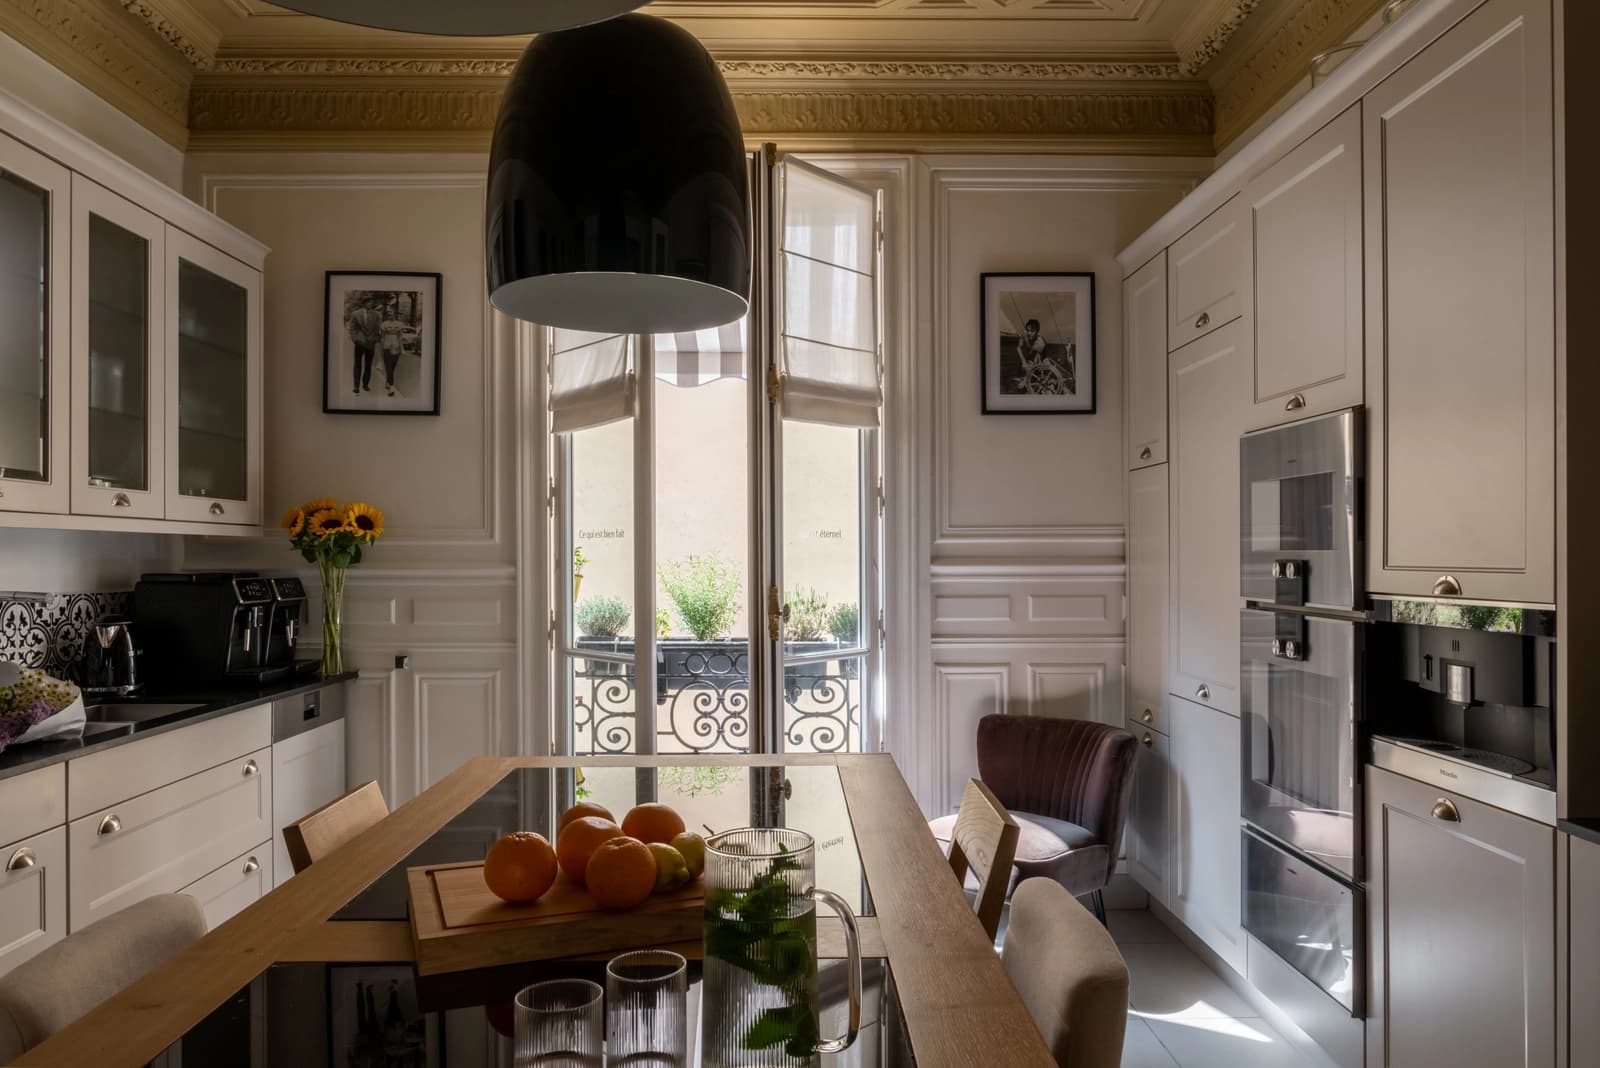 Kitchen in Parisian apartment with character - 4